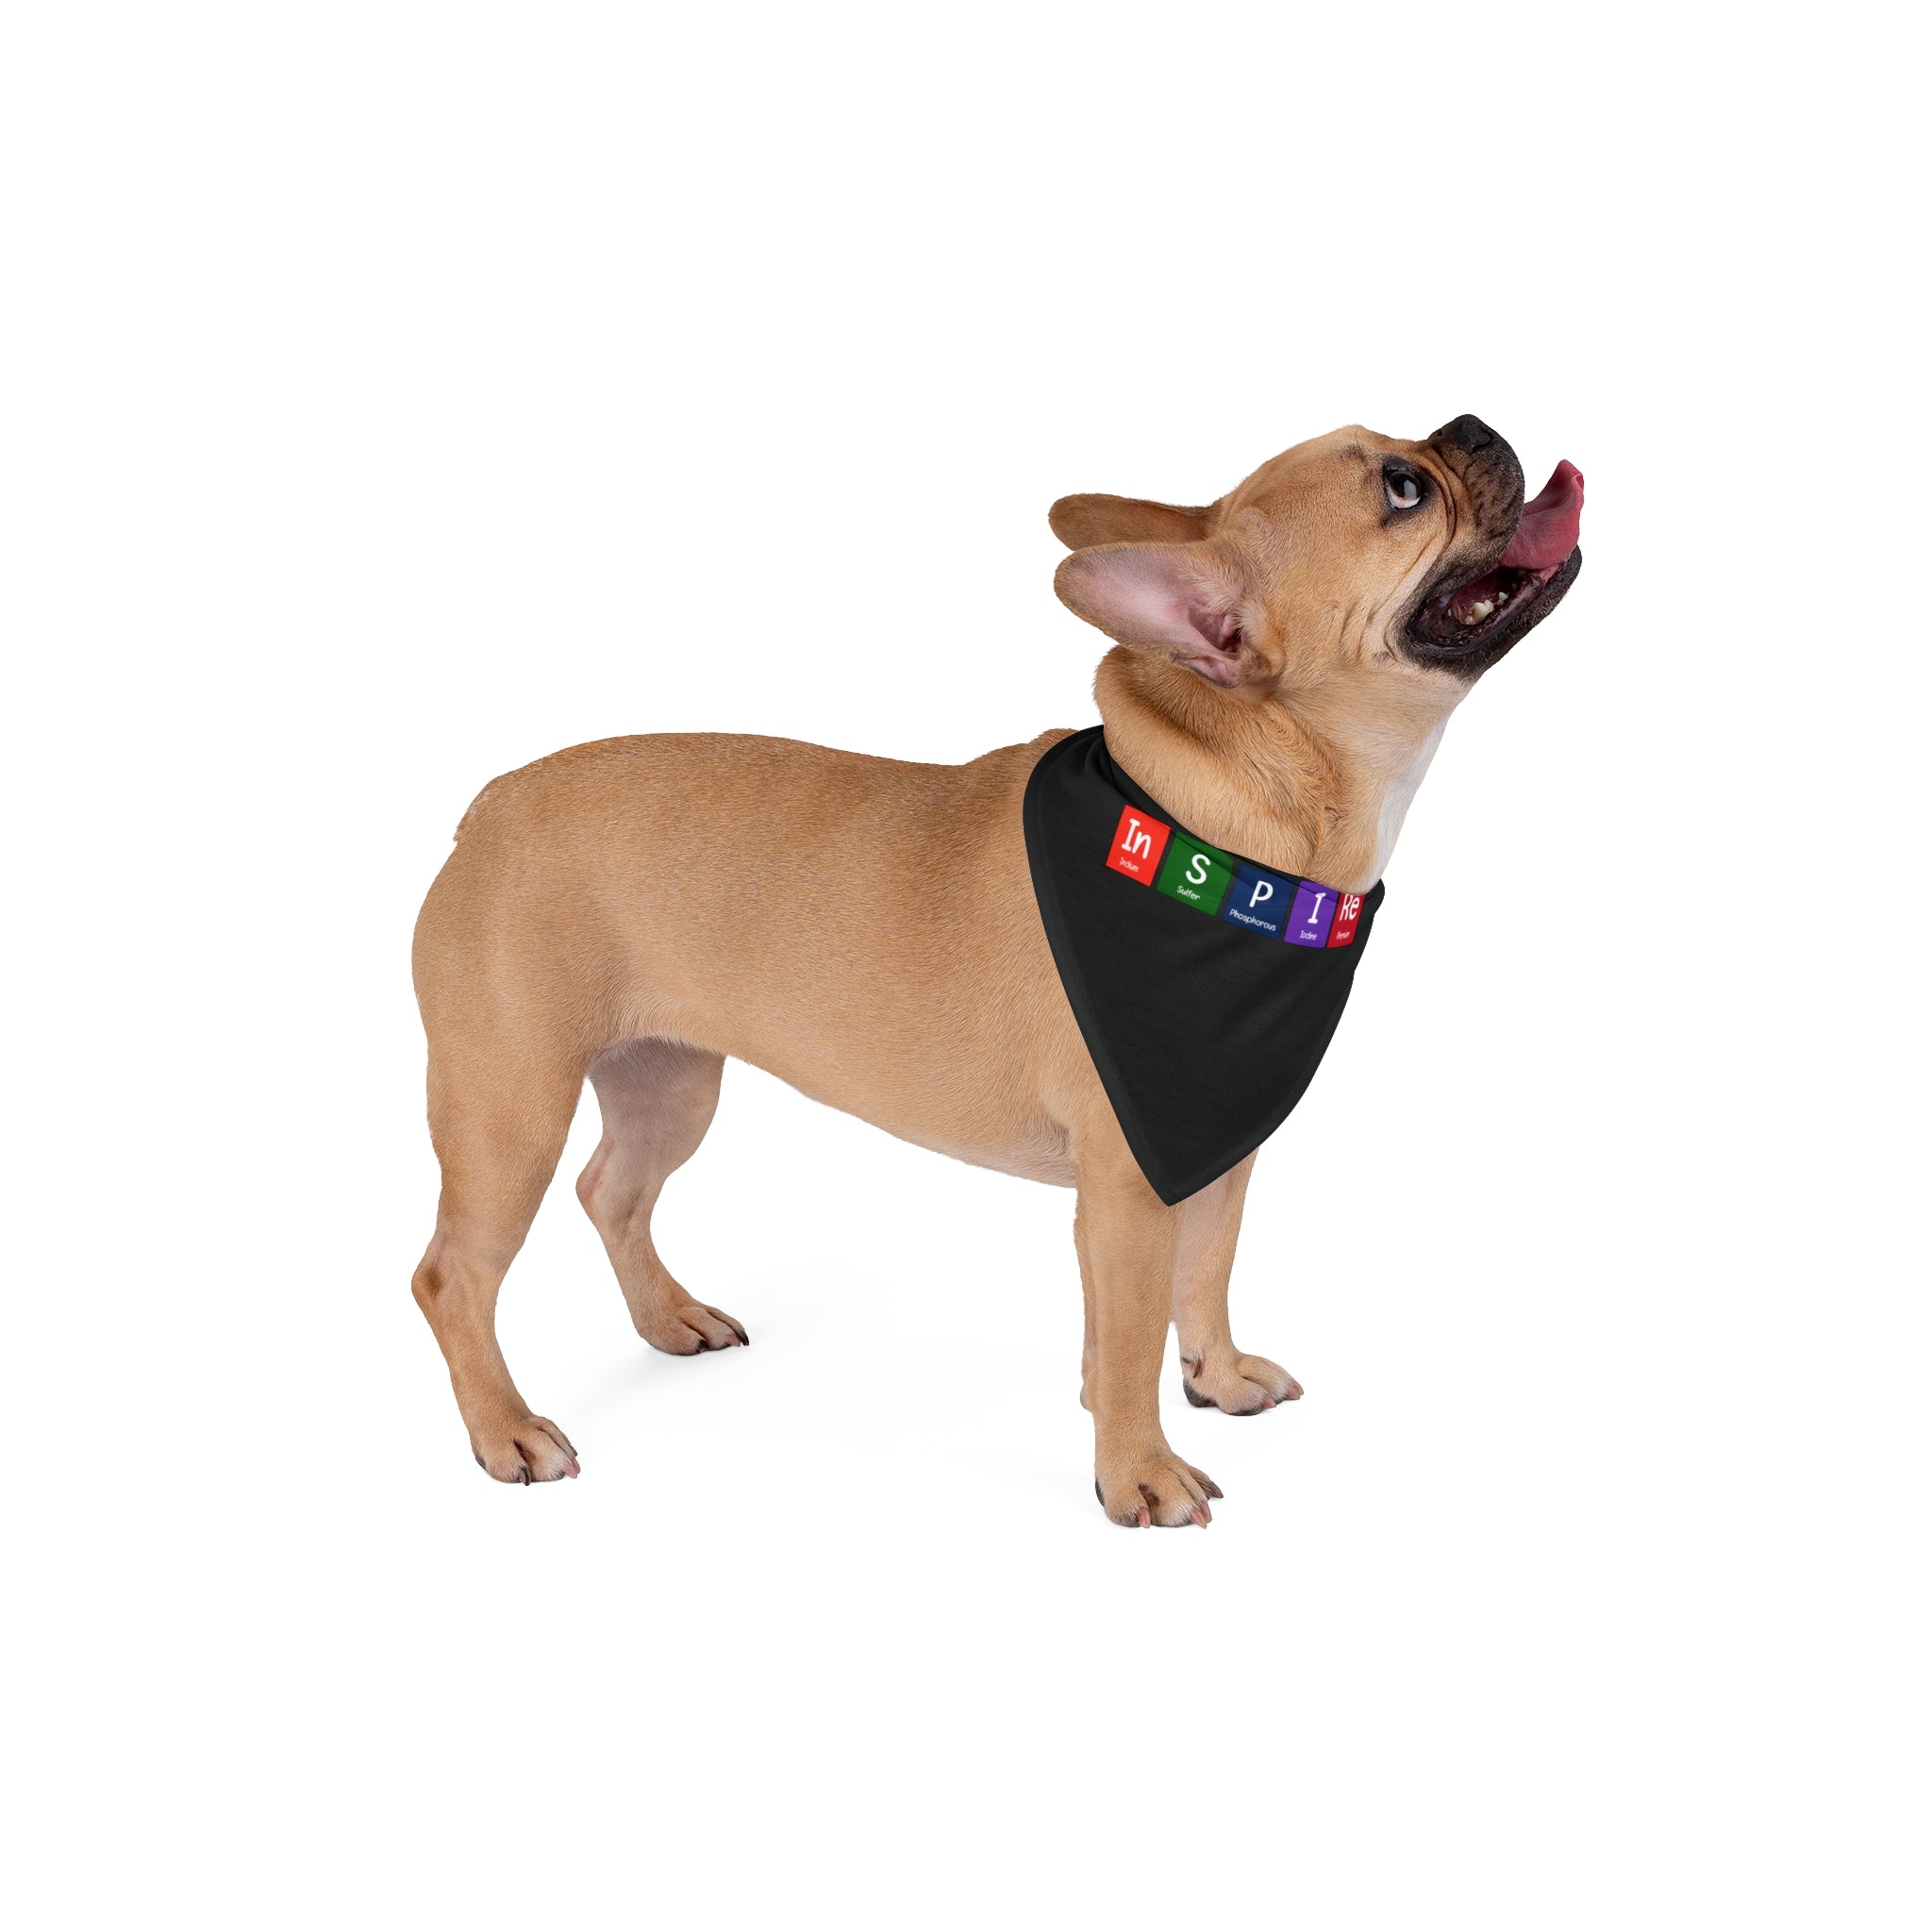 A small brown dog wearing an In-S-P-I-Re - Pet Bandana crafted from soft-spun polyester, standing and looking upward with an open mouth on a white background.